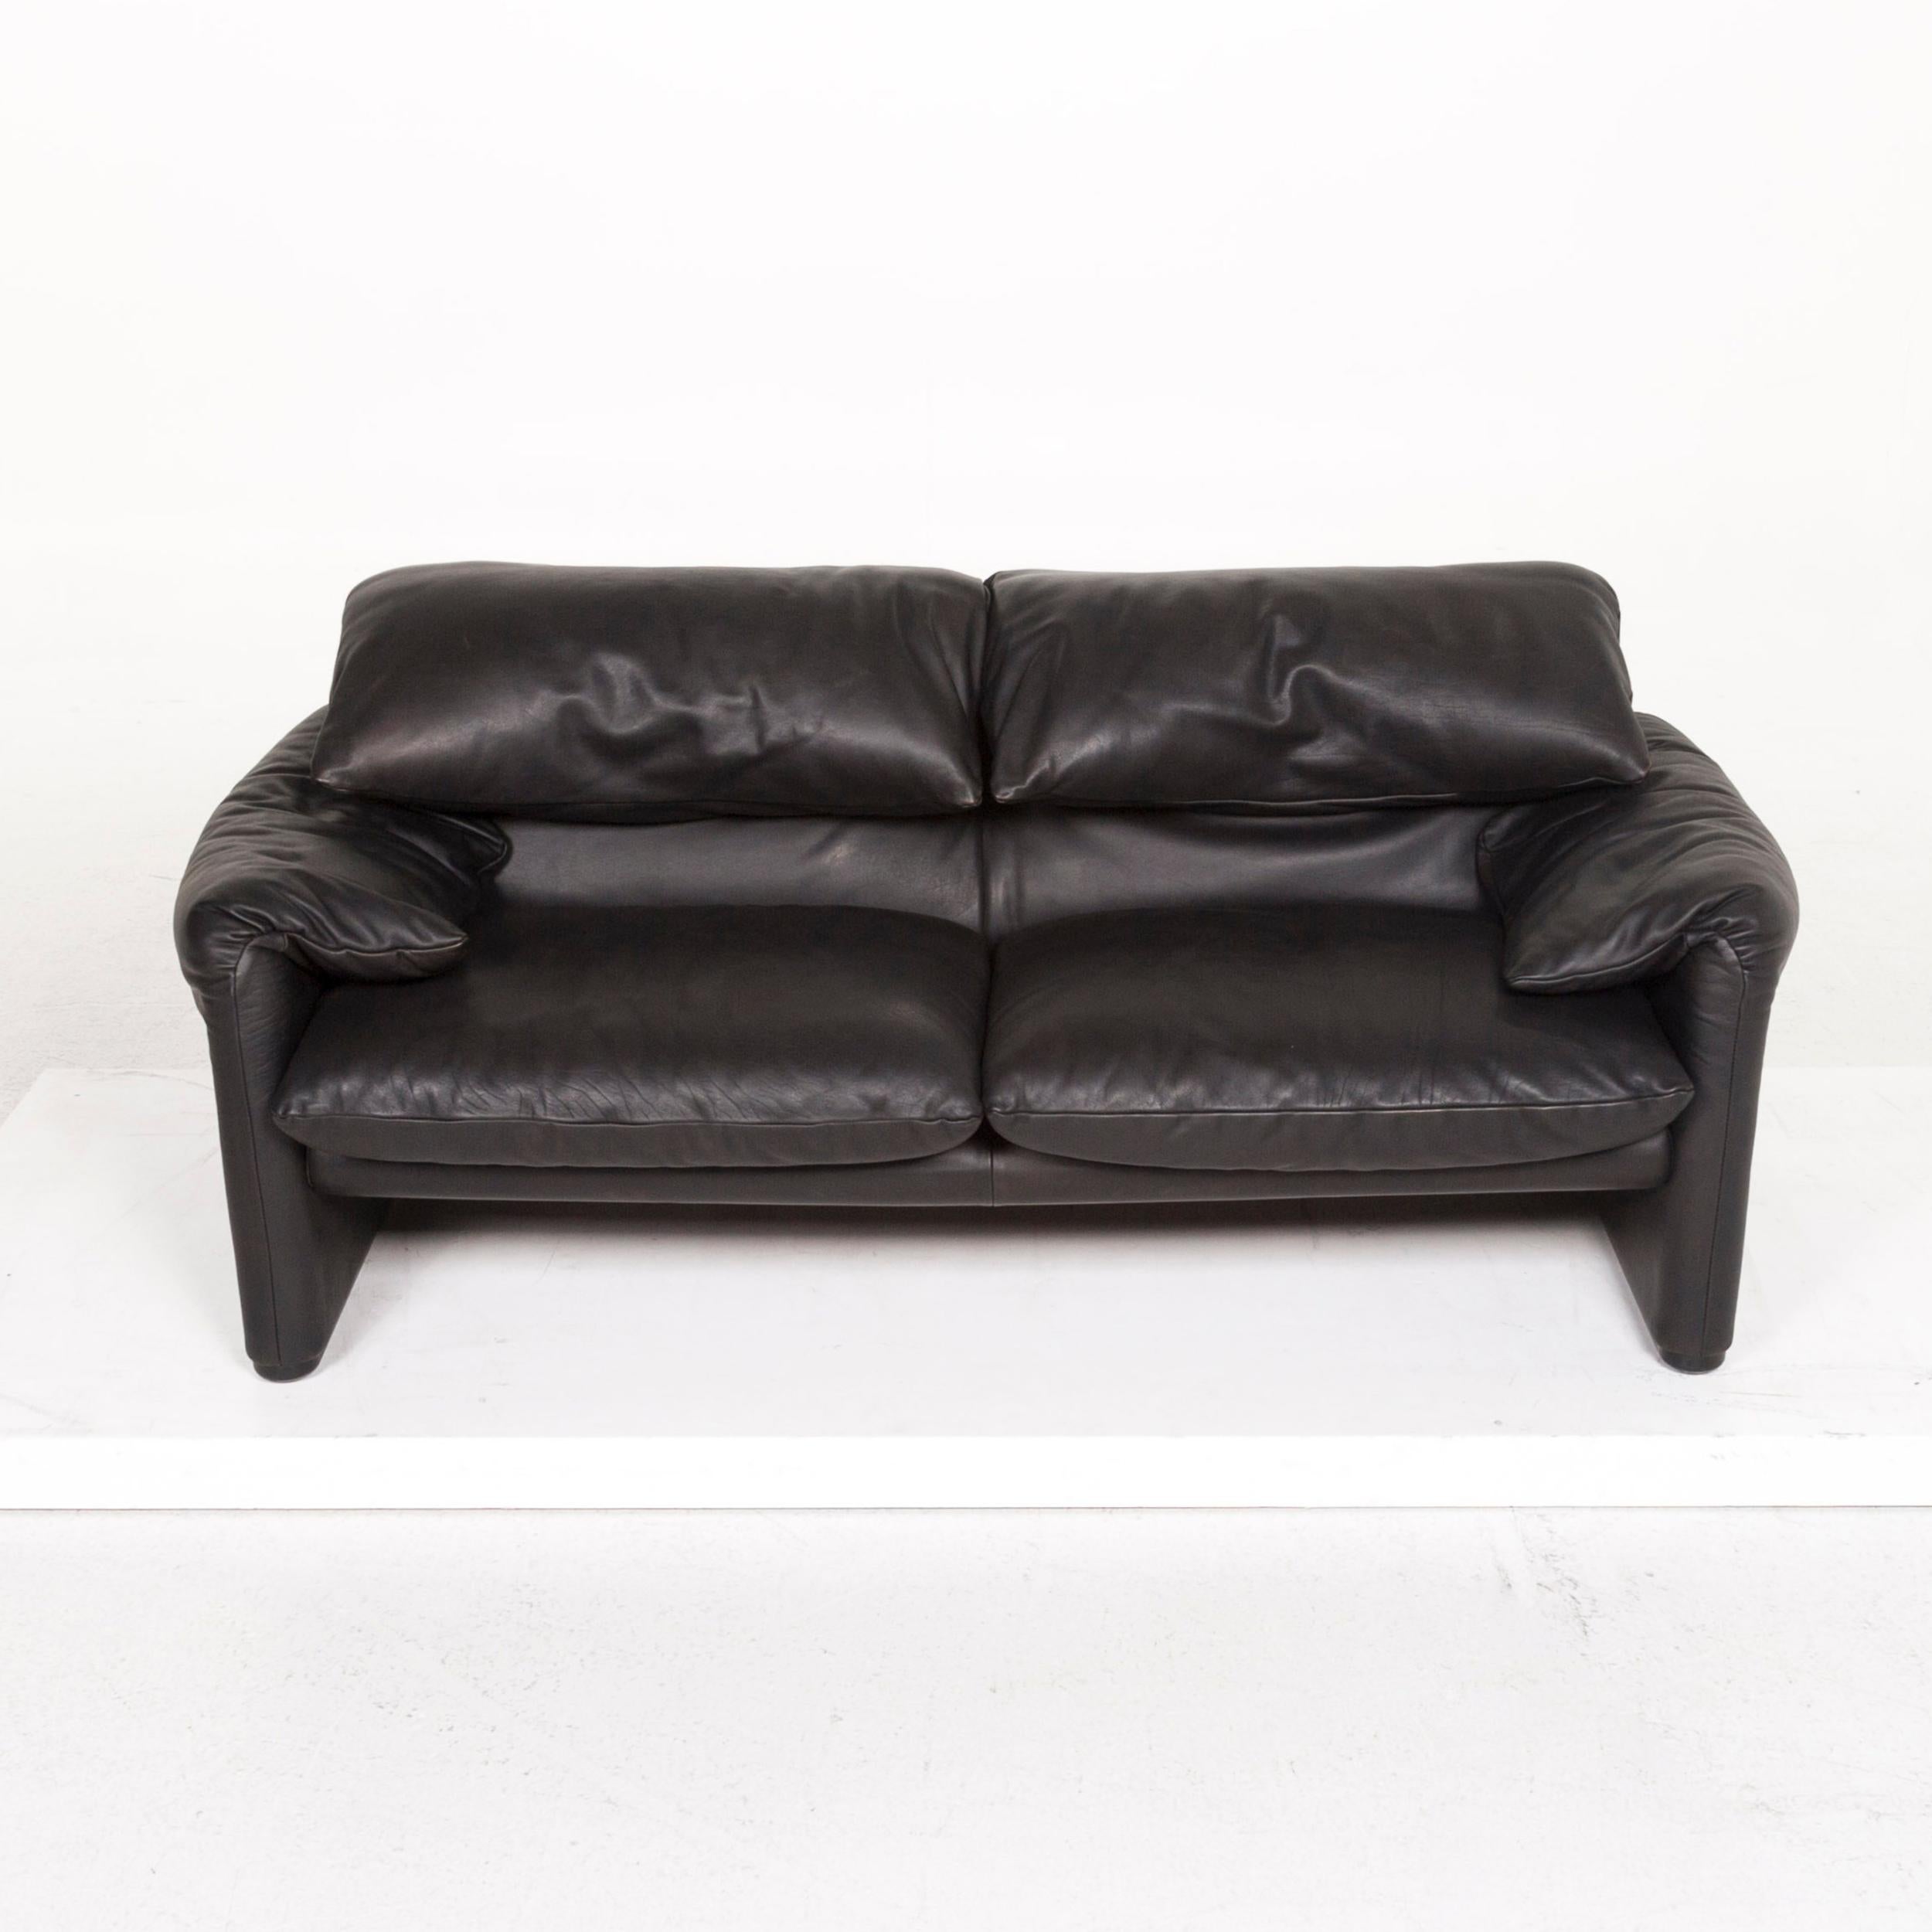 Contemporary Cassina Maralunga Leather Sofa Black Two-Seat Function Couch